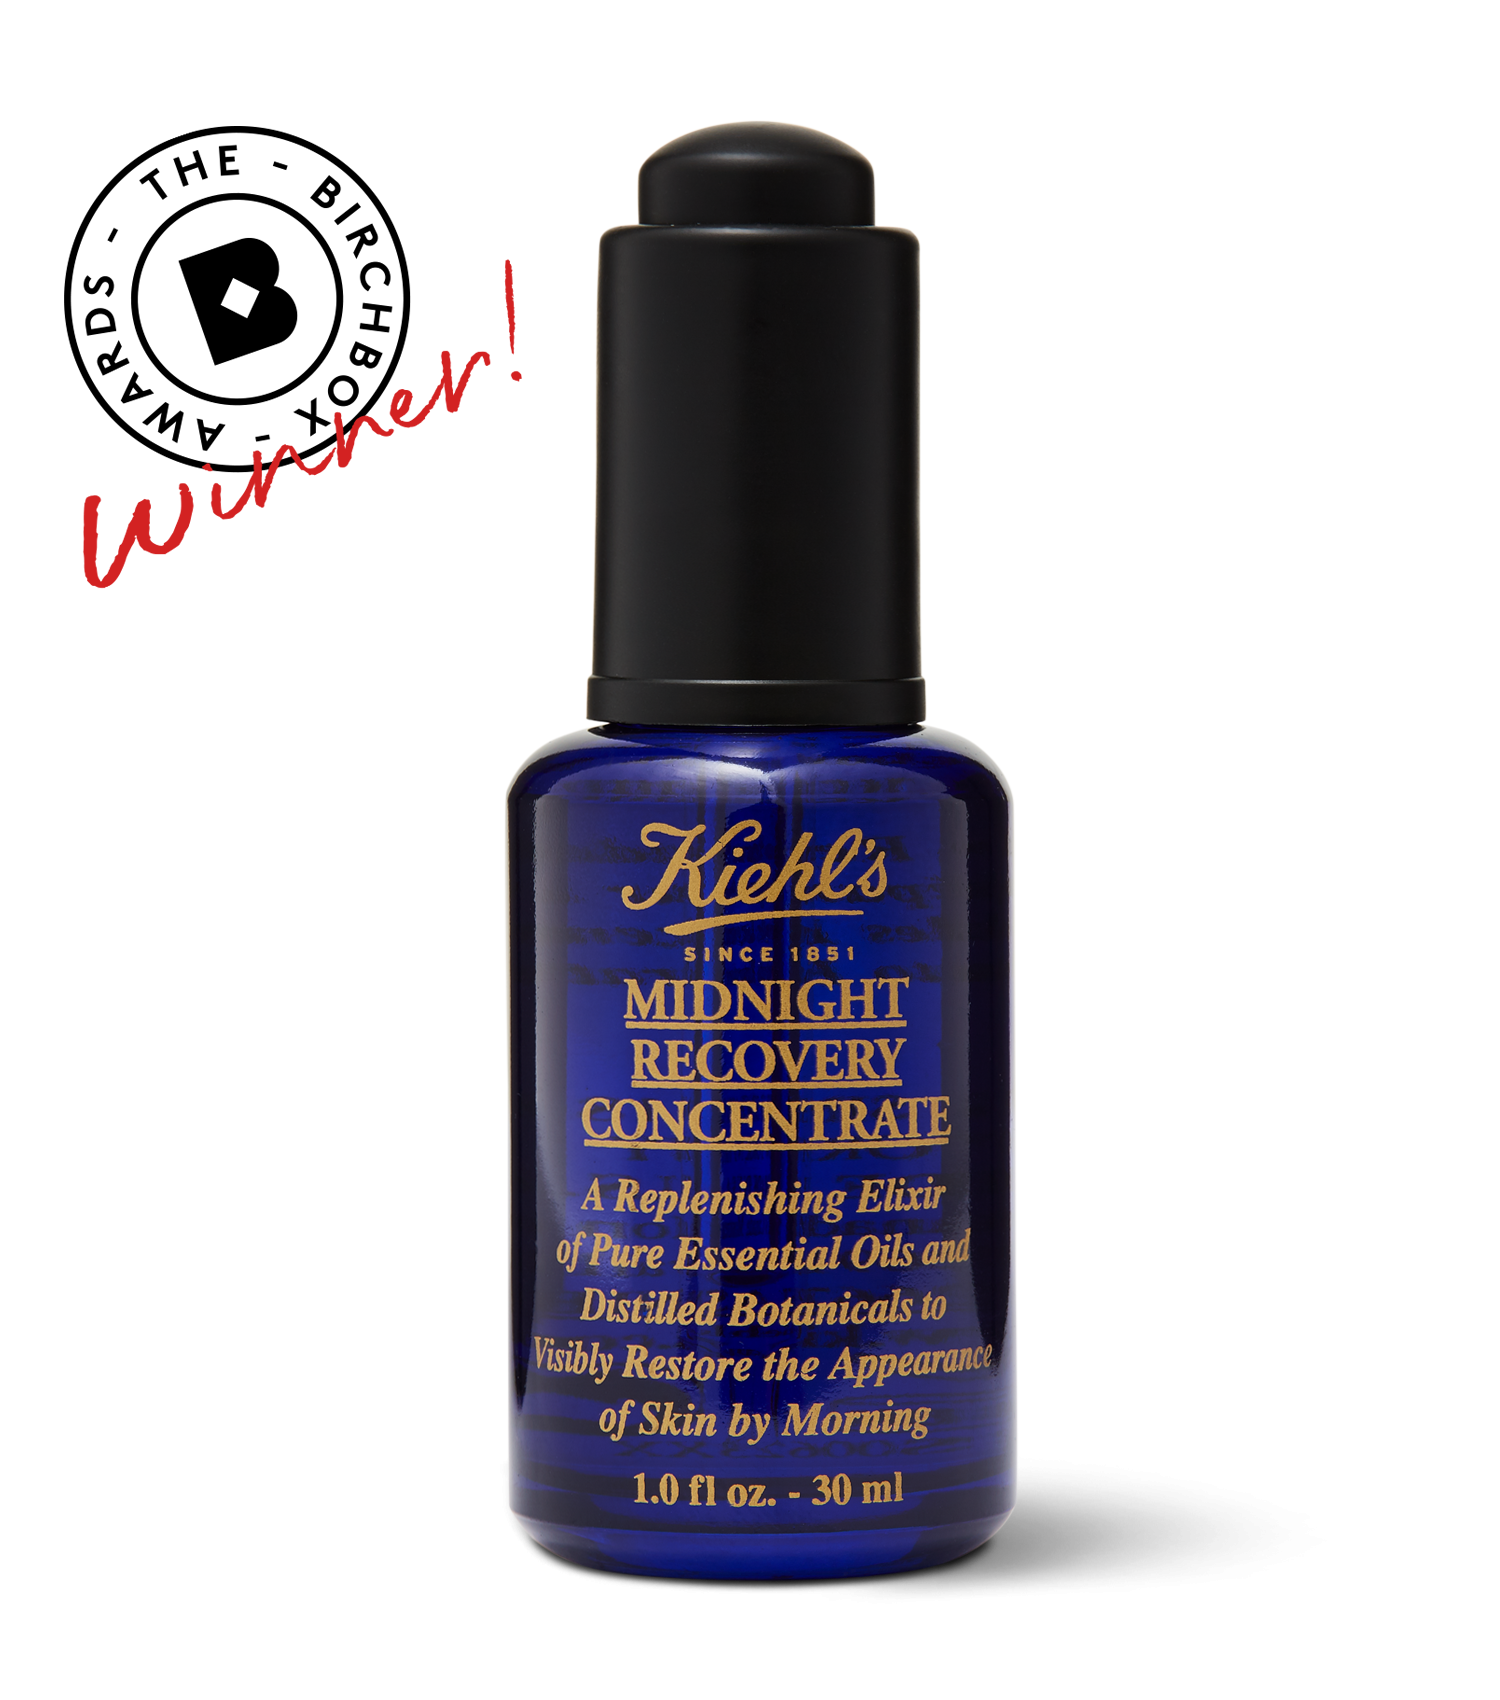 Kiehl's Midnight Recovery Concentrate Midnight Recovery Concentrate - deluxe - 4mL 1